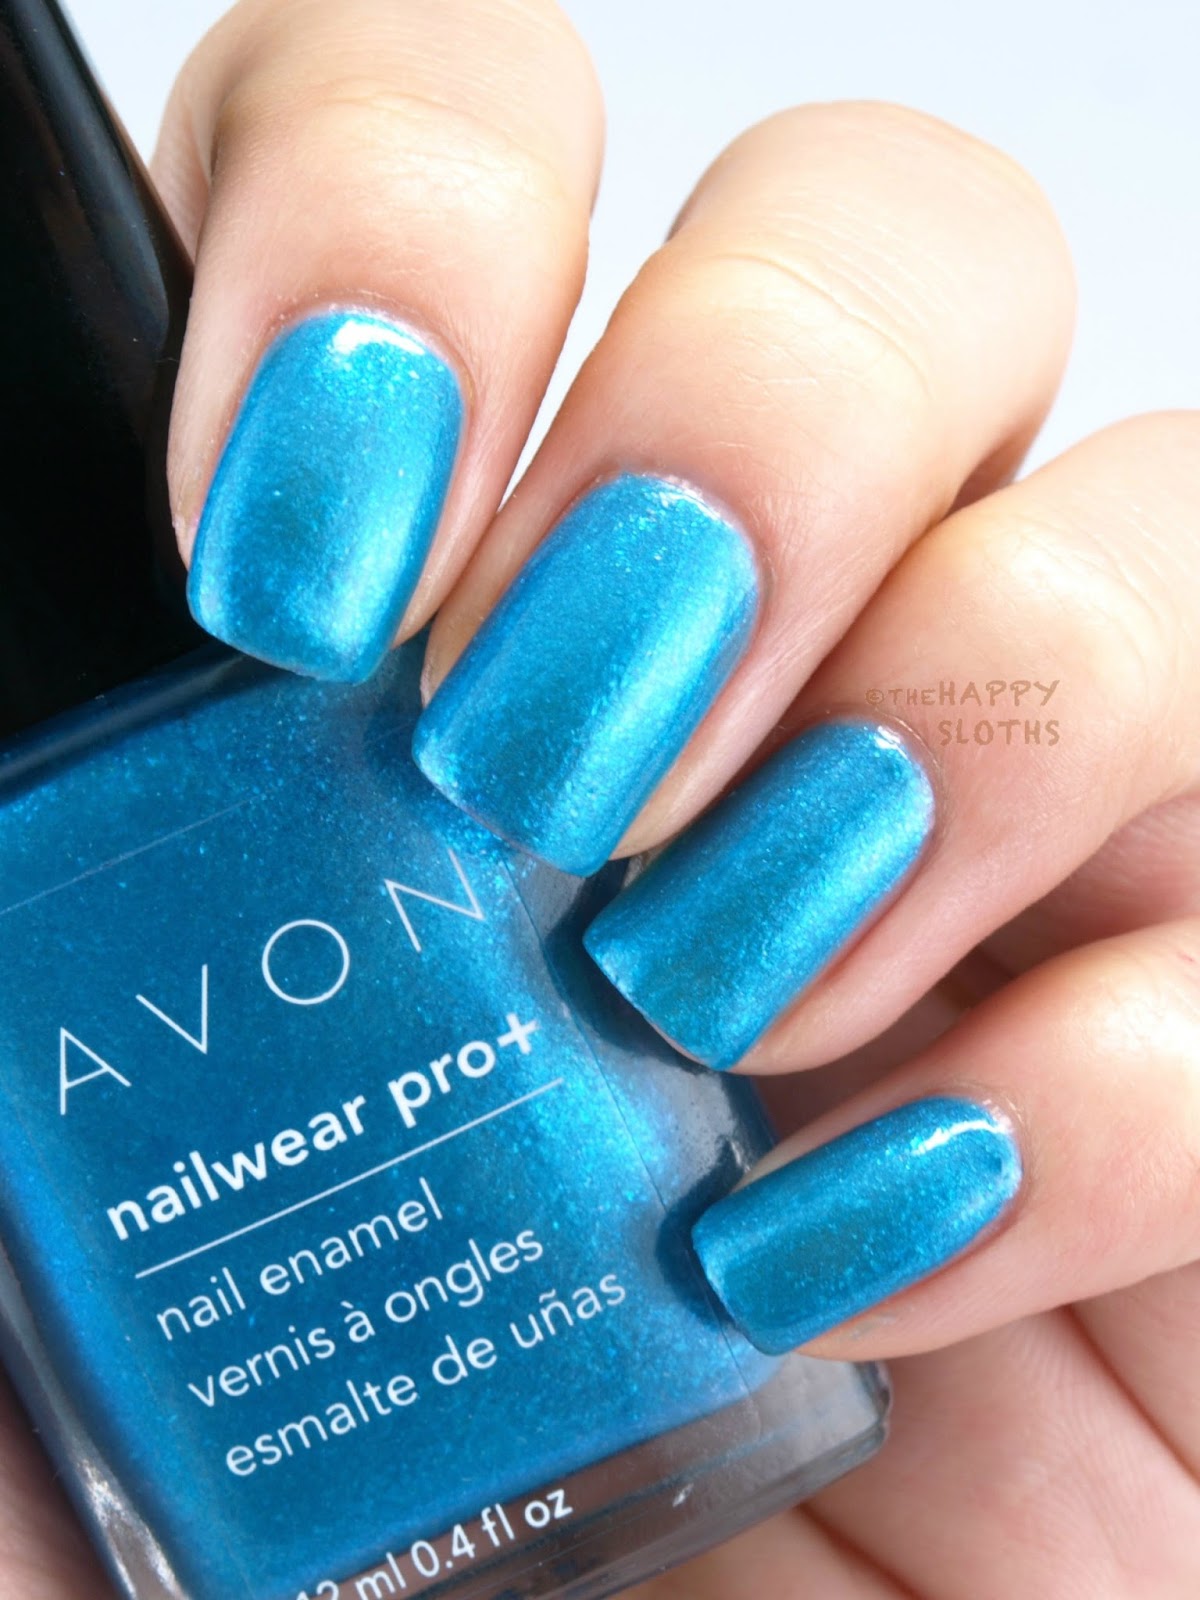 Avon Knows The Way To This Girl's Heart - New Nailwear Pro Greens! : All  Lacquered Up